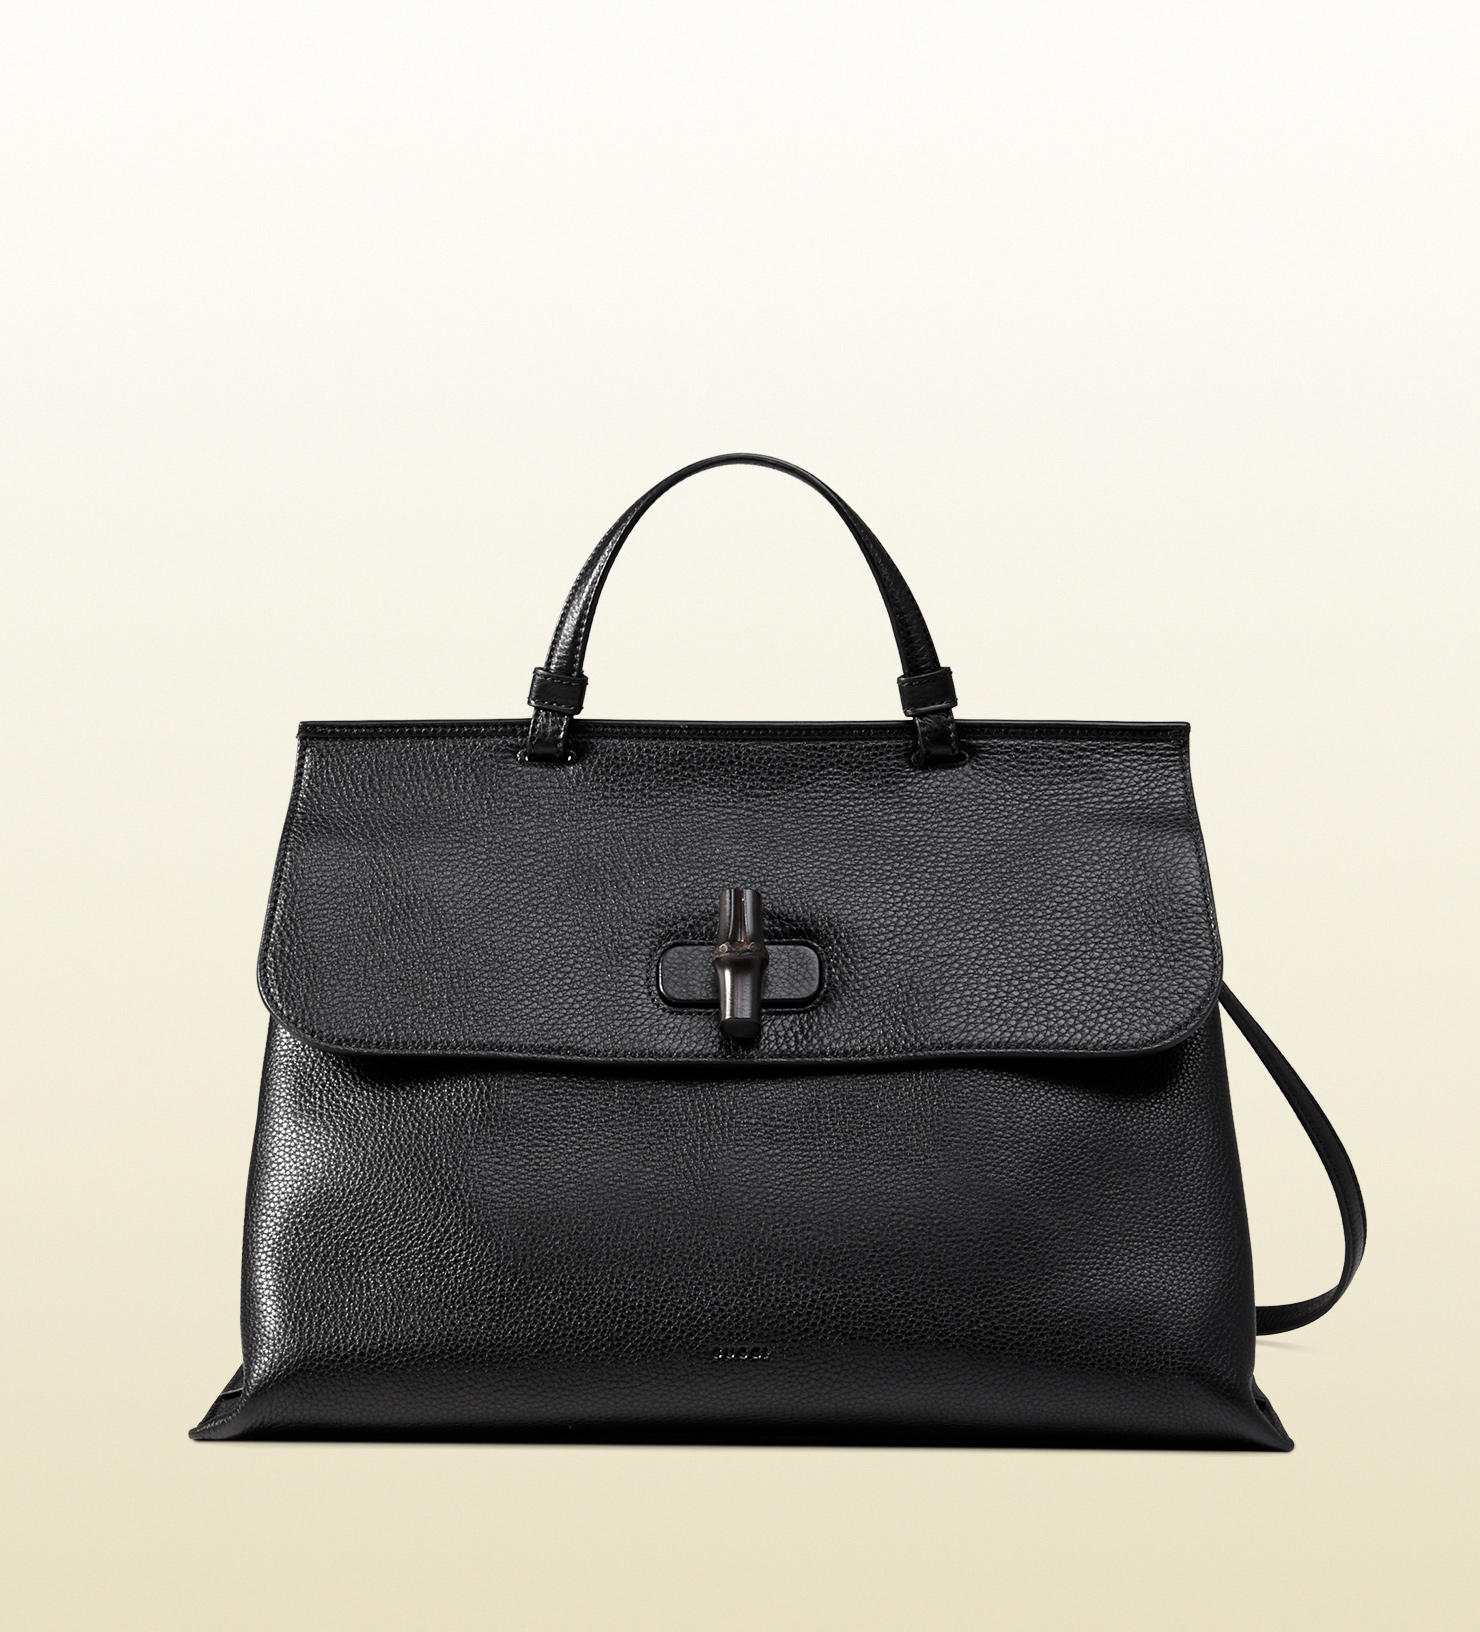 14 Affordable Quiet Luxury Bags That Will Stand The Test Of Time